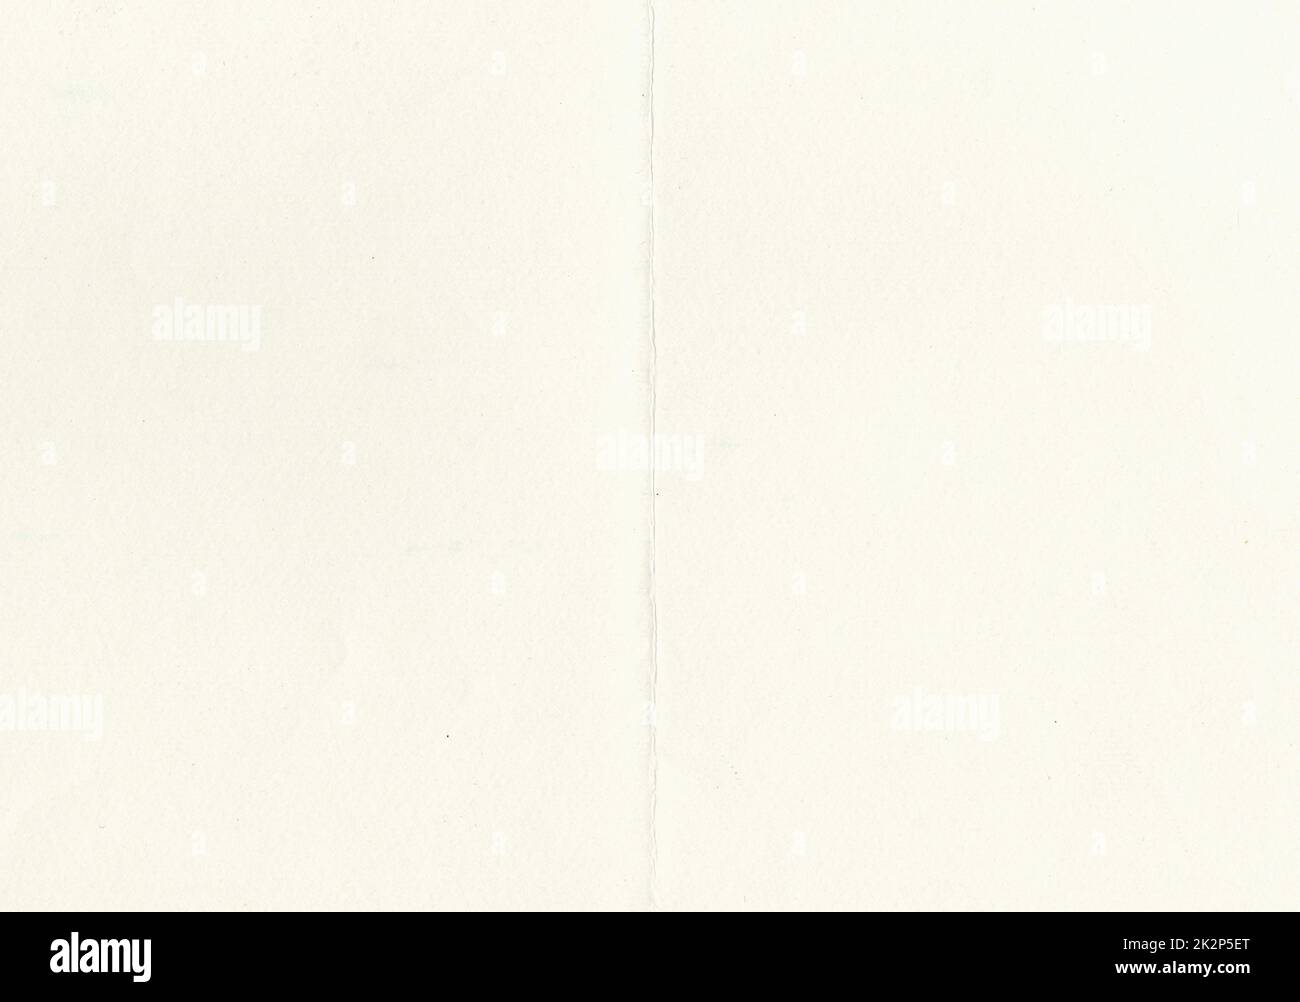 Large image of paper texture background folded in half with aged, uncoated fine fiber grain and dust particles in light beige yellowed color smooth with copy space for text wallpapers or designs Stock Photo